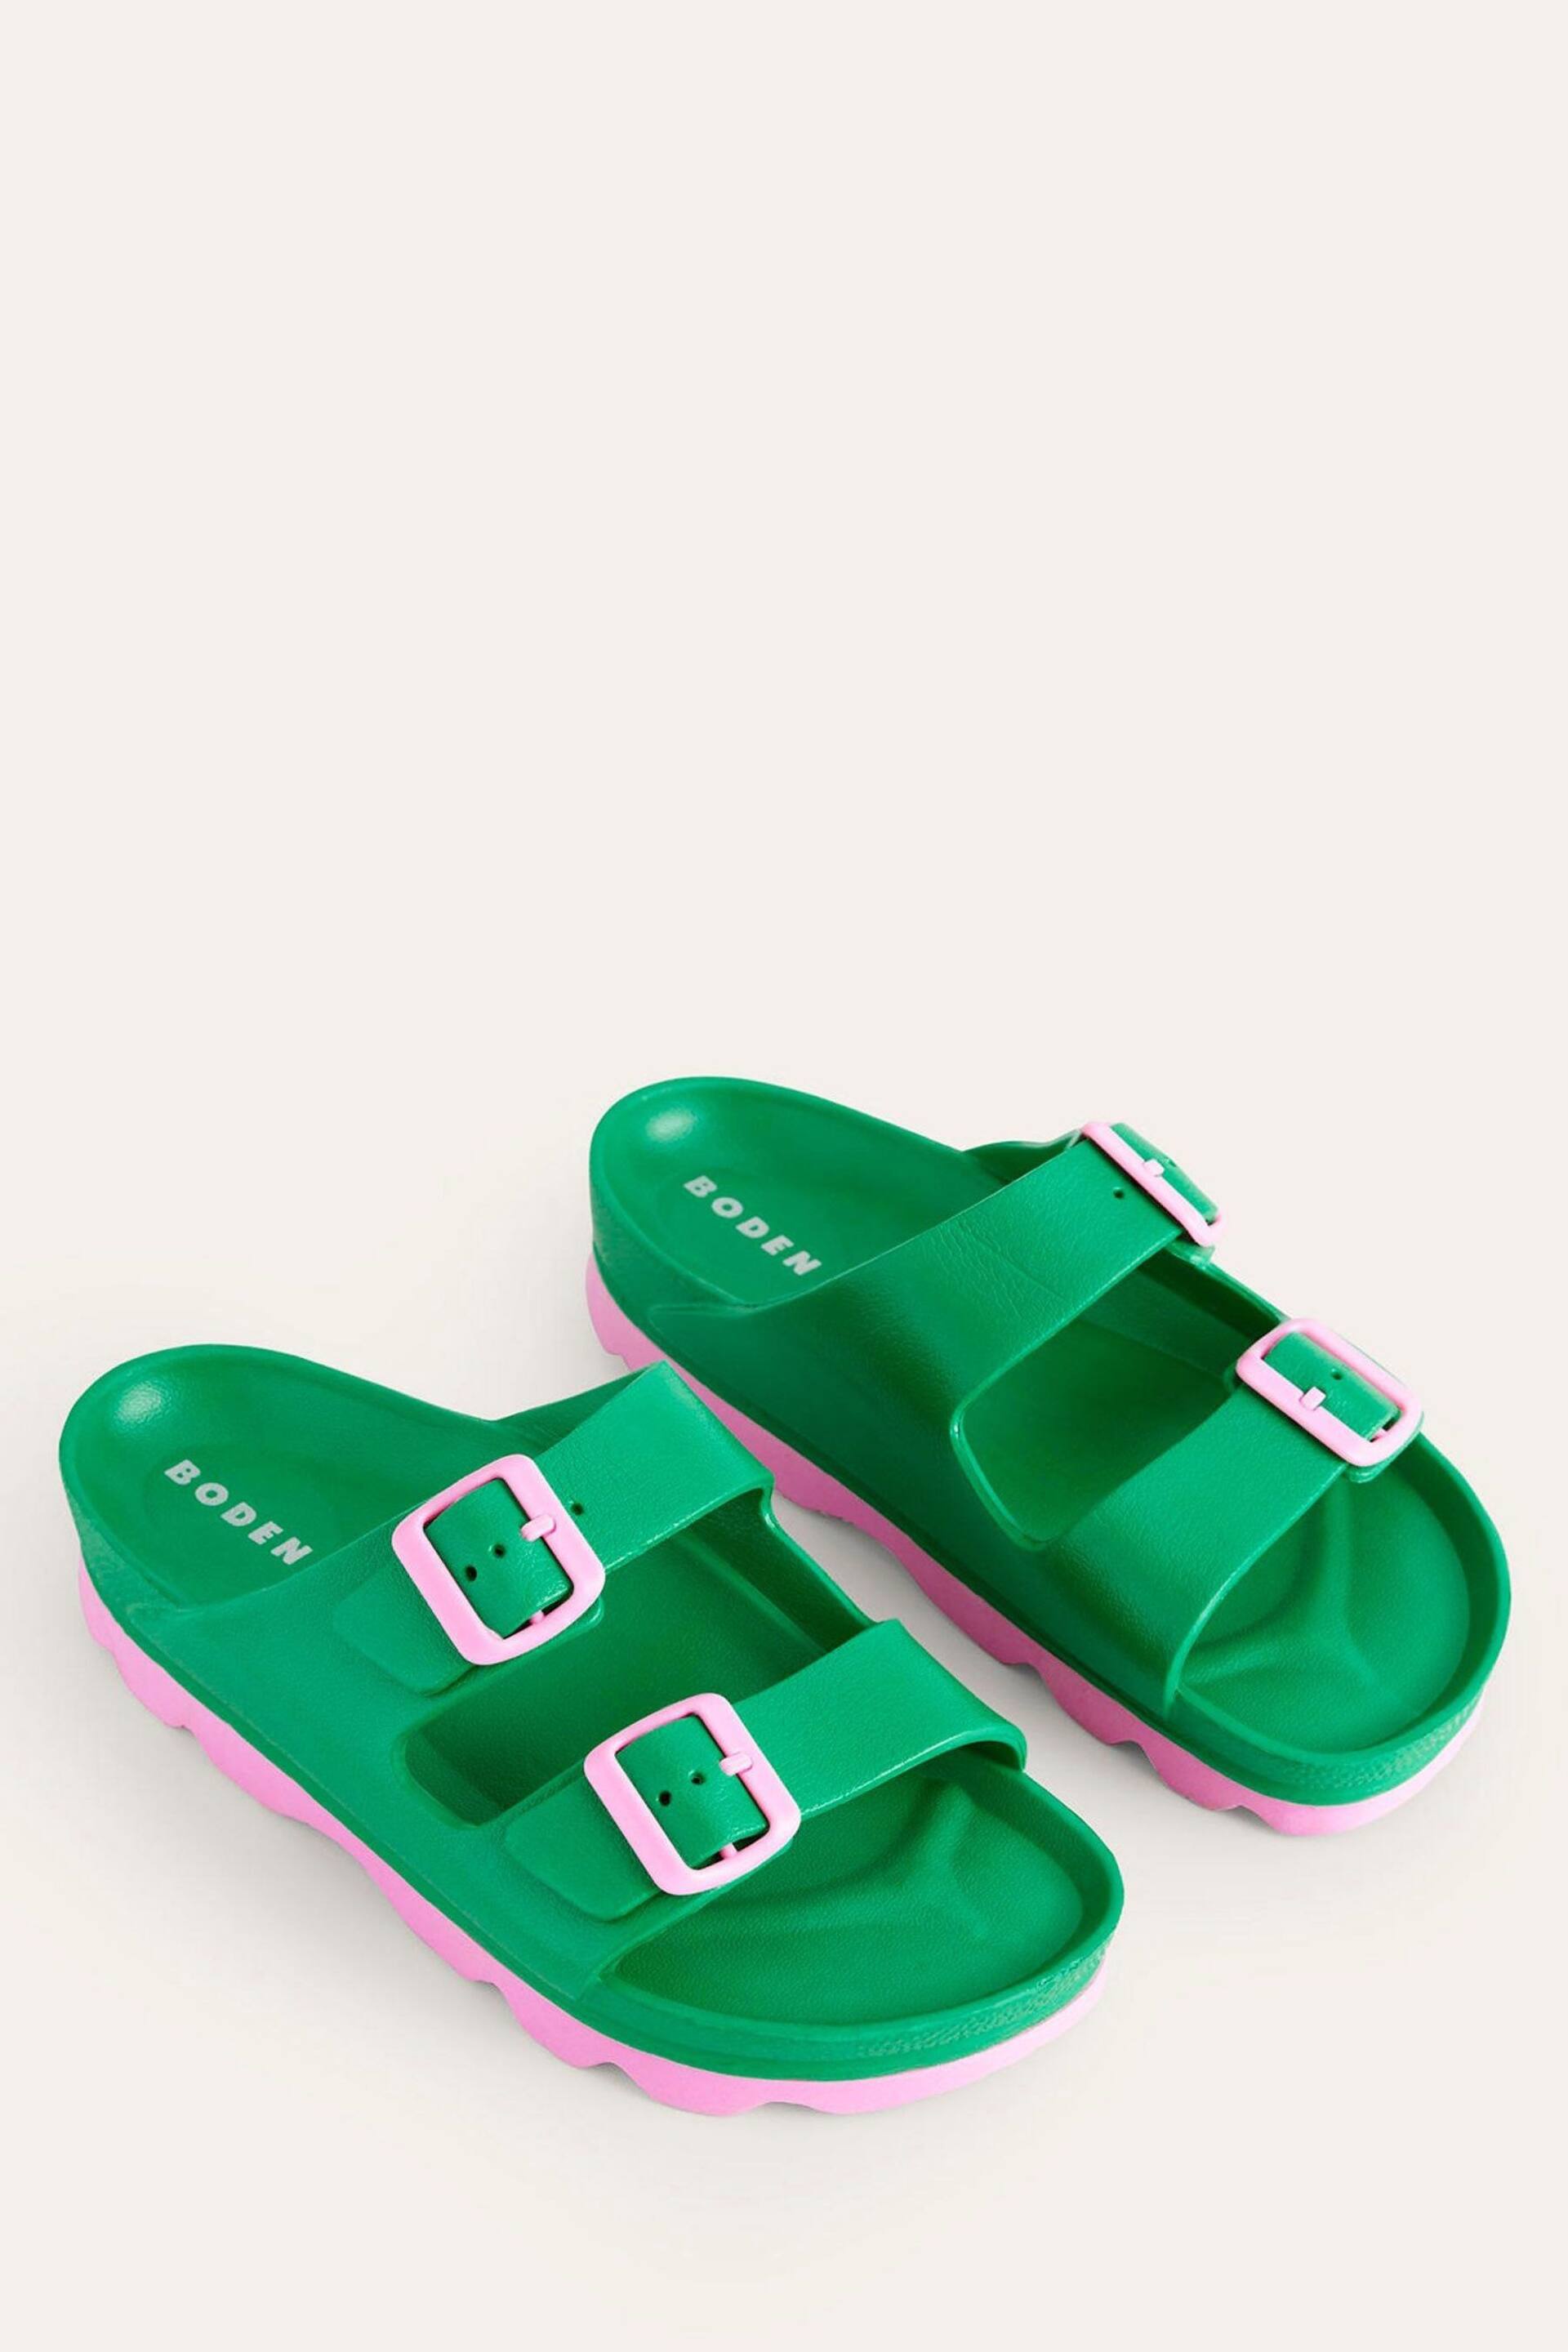 Boden Green Lyla Double Buckle Slides - Image 2 of 5